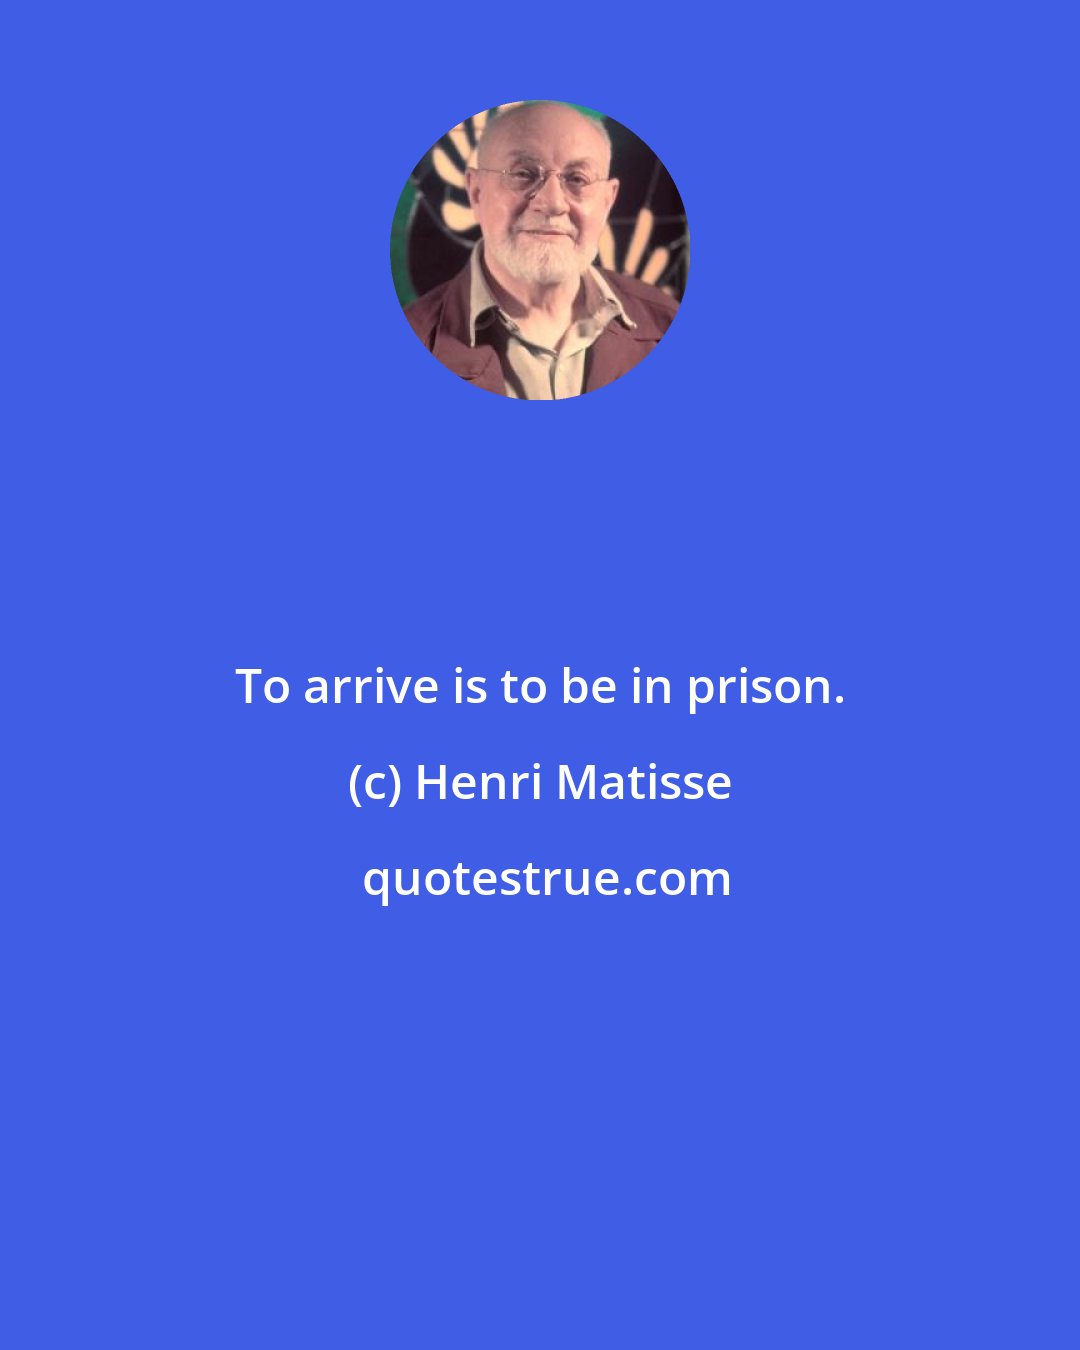 Henri Matisse: To arrive is to be in prison.